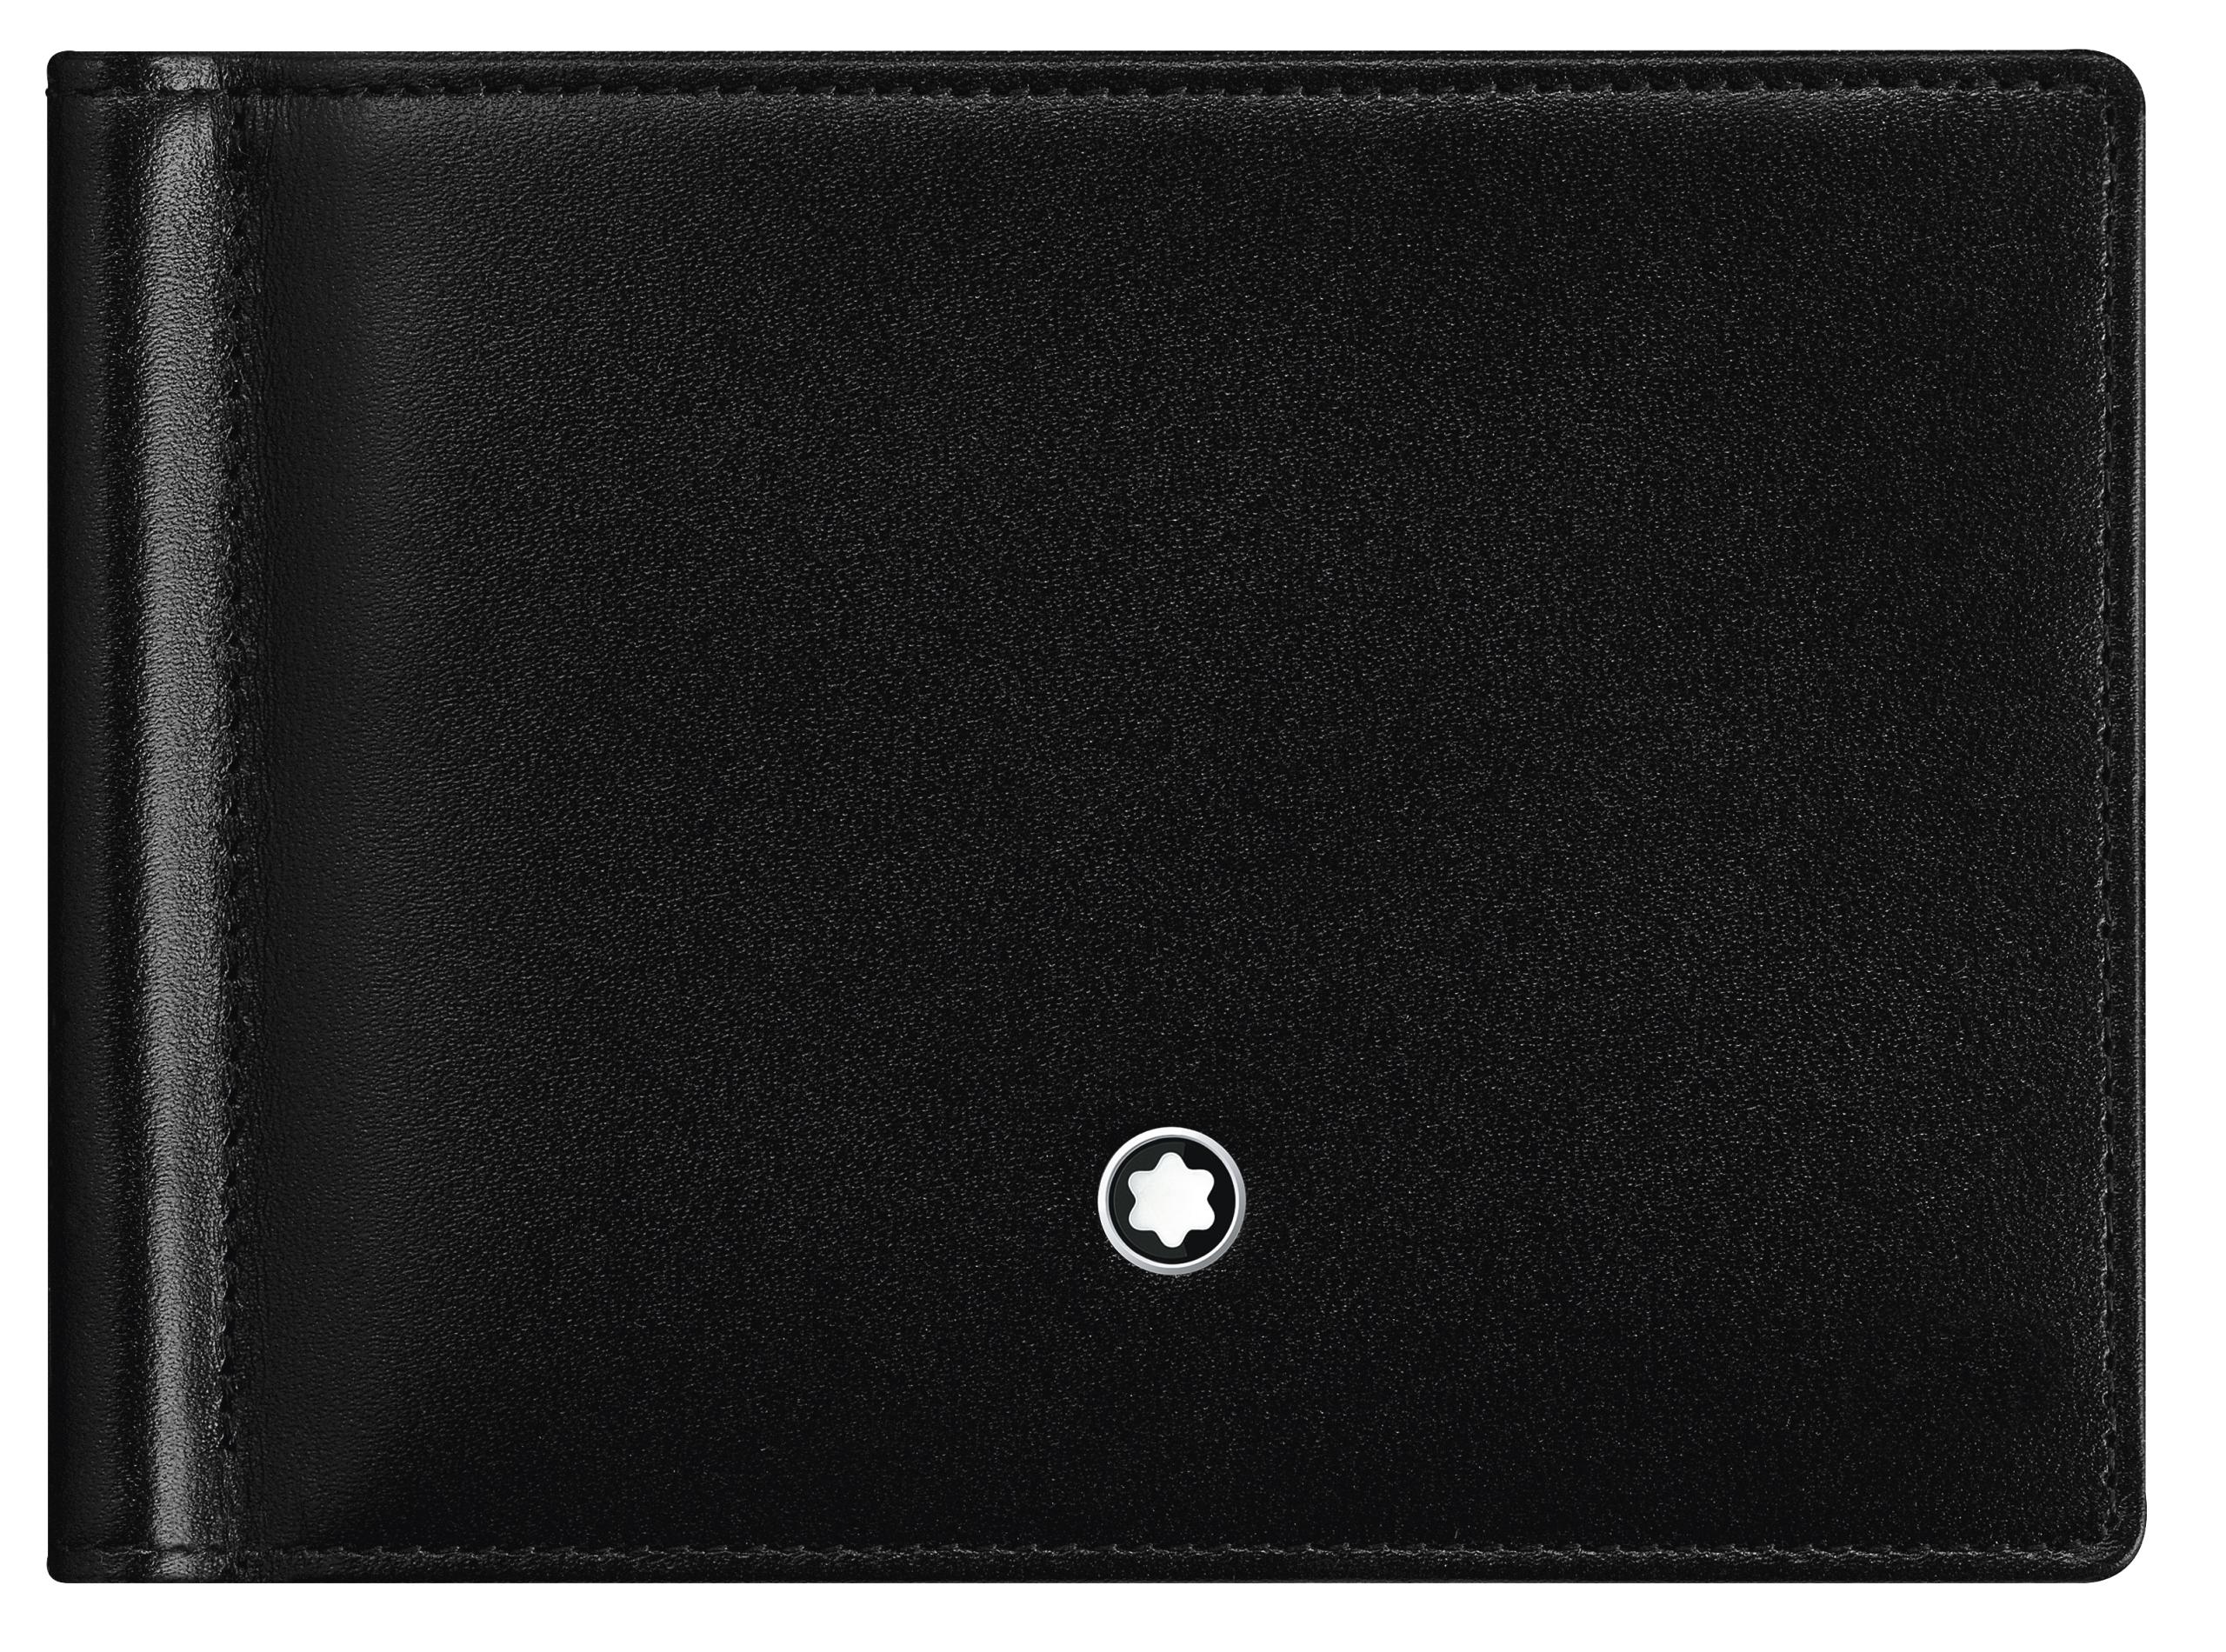 Montblanc Sartorial Black Leather Wallet with Money Clip 6 CC